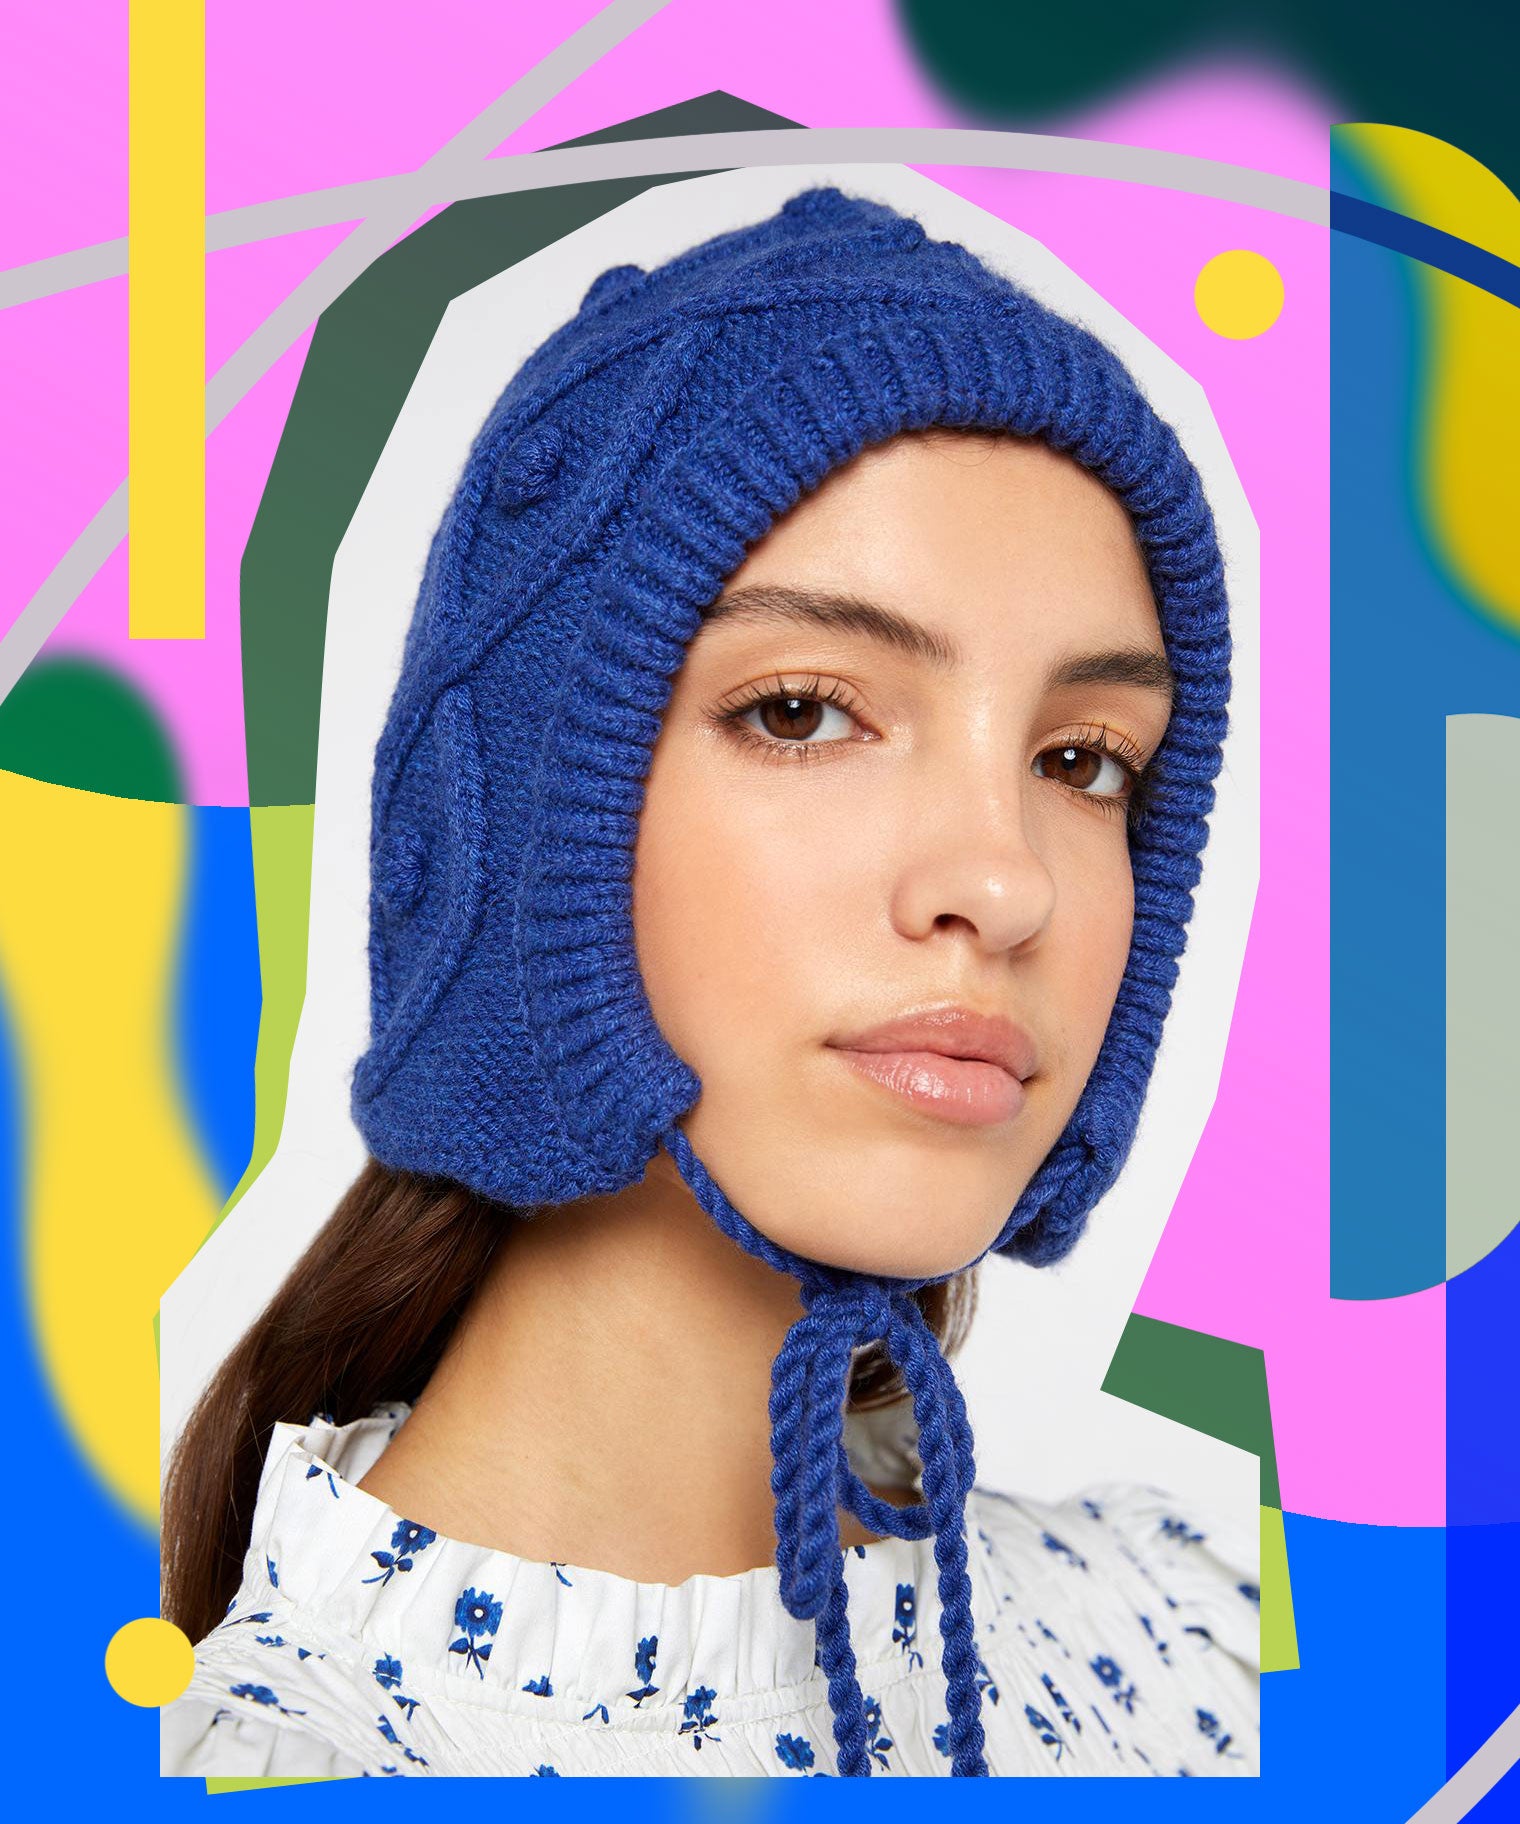 Knitted Winter Bonnet Is 2022's Big Fashion Trend